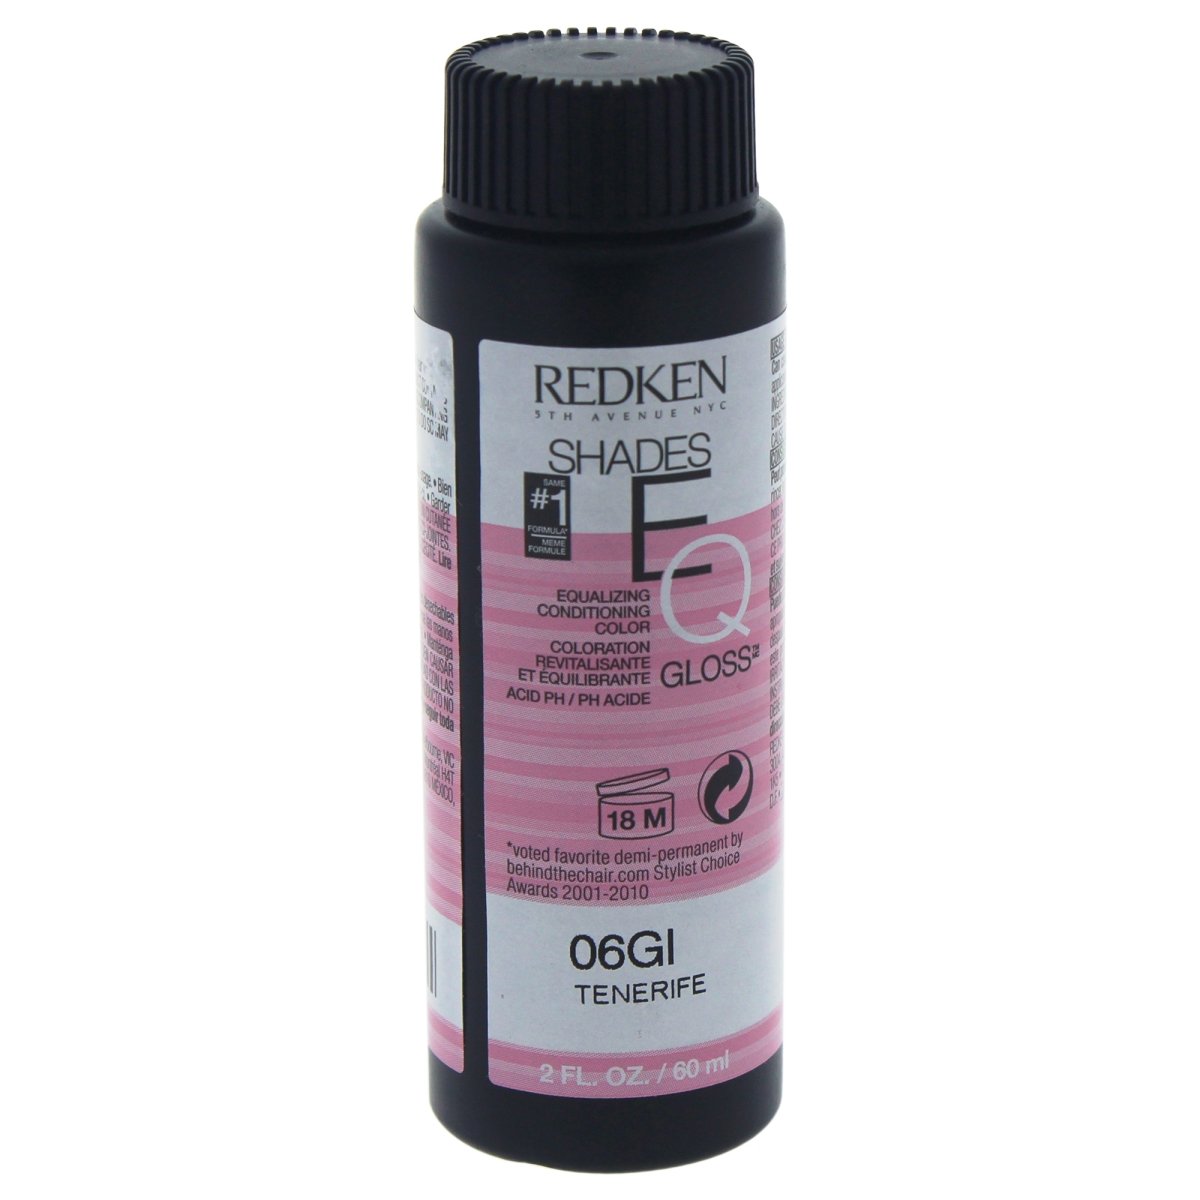 Picture of Redken U-HC-11697 2 oz Shades EQ 06GI Gloss Tenerife Hair Color for Unisex